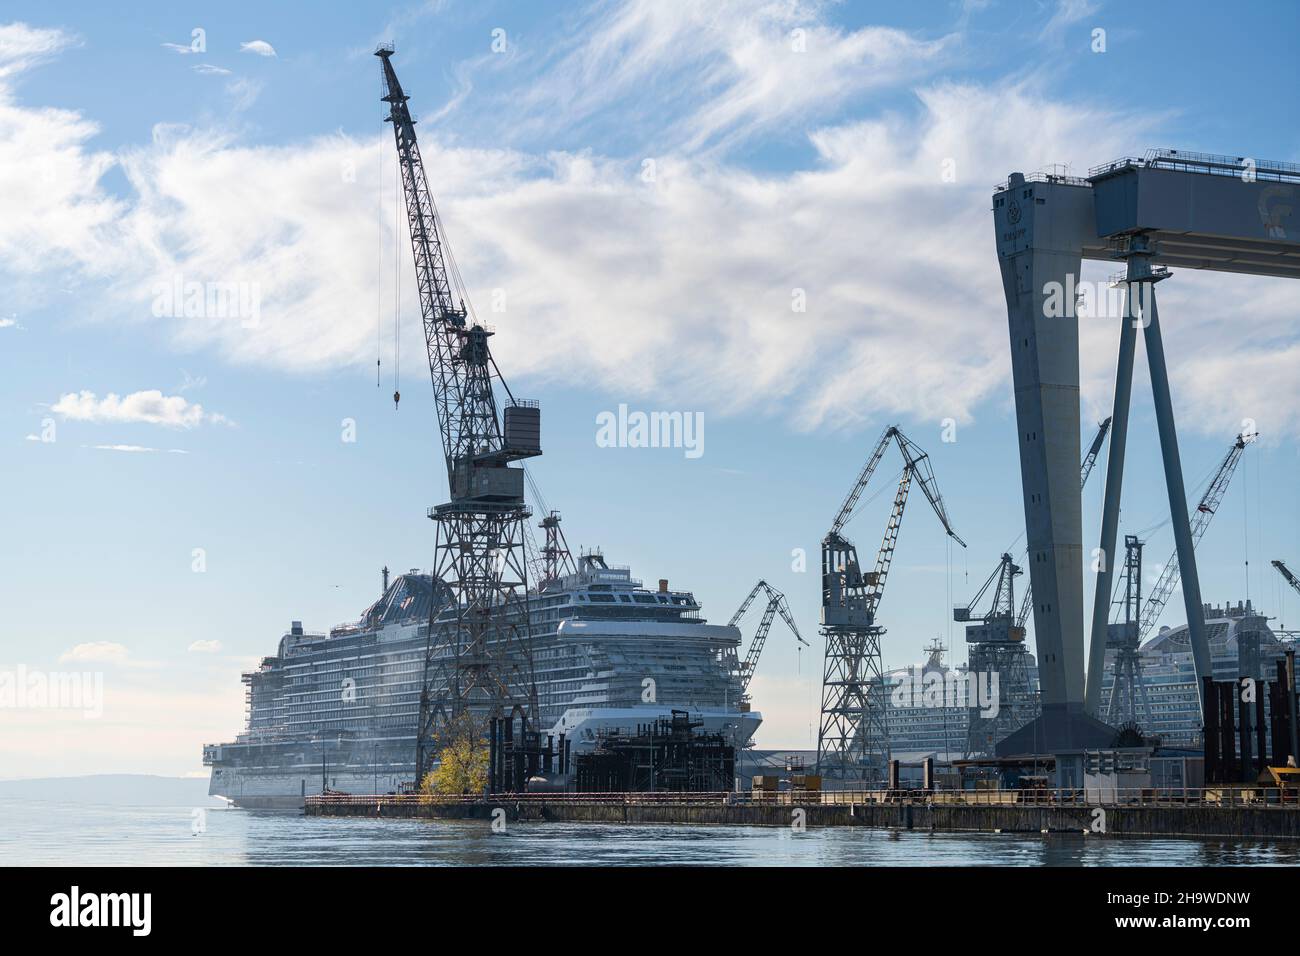 Monfalcone, Italy. December 2021.  view of a large cruise ship under construction in a shipyard Stock Photo